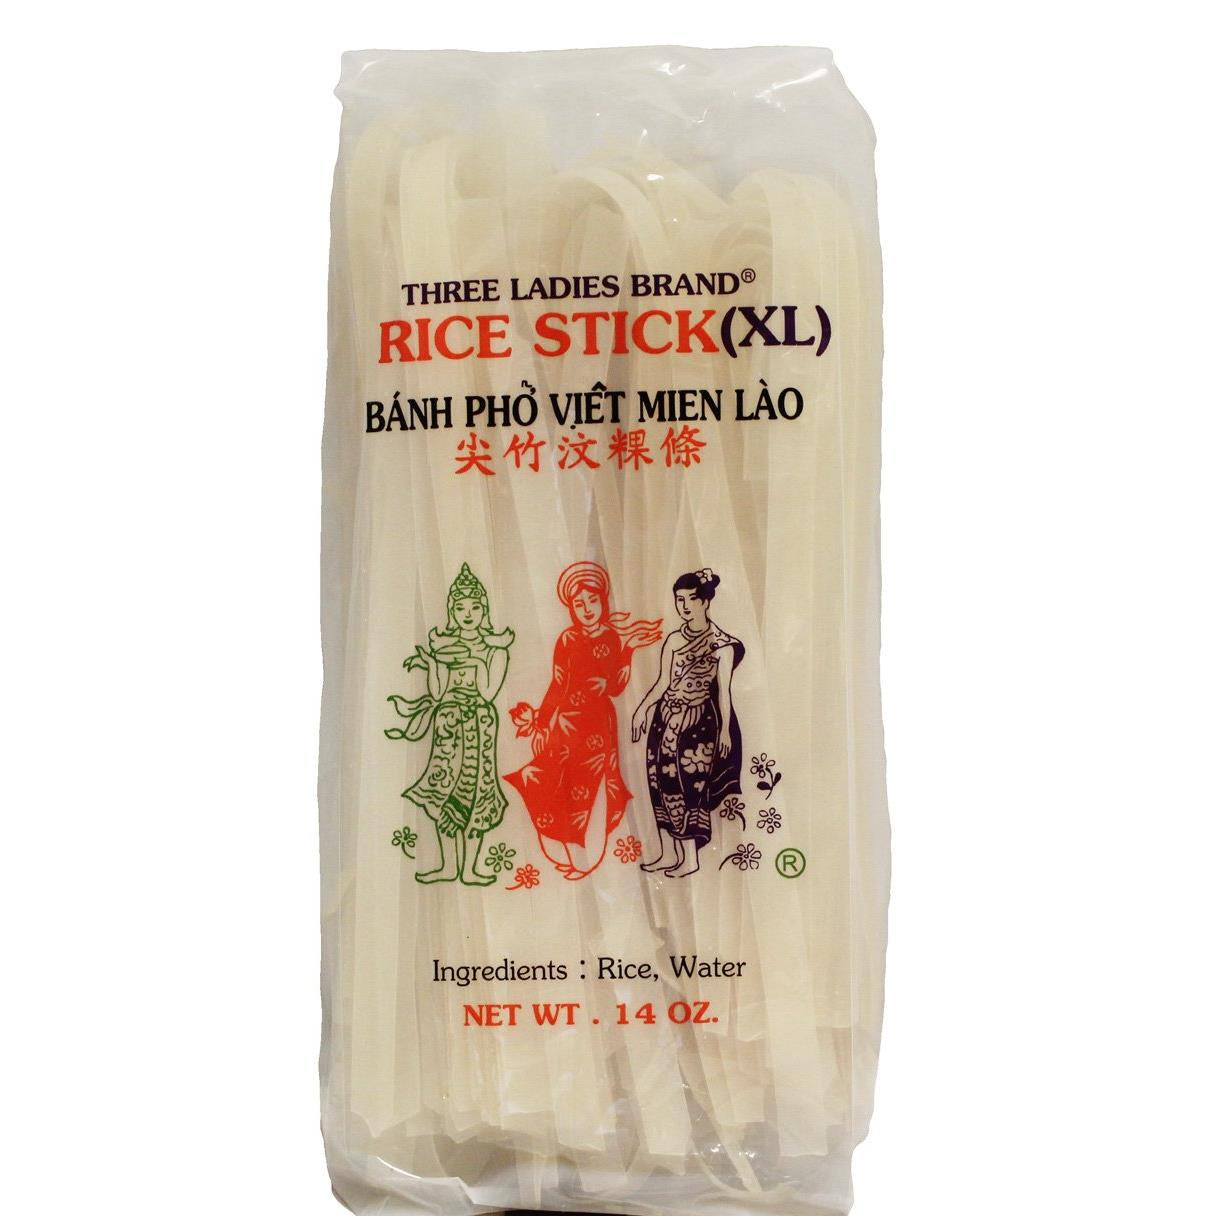 Rice Stick Noodle - 14 Oz. (Pack of 3 Bags) (Extra-Large)